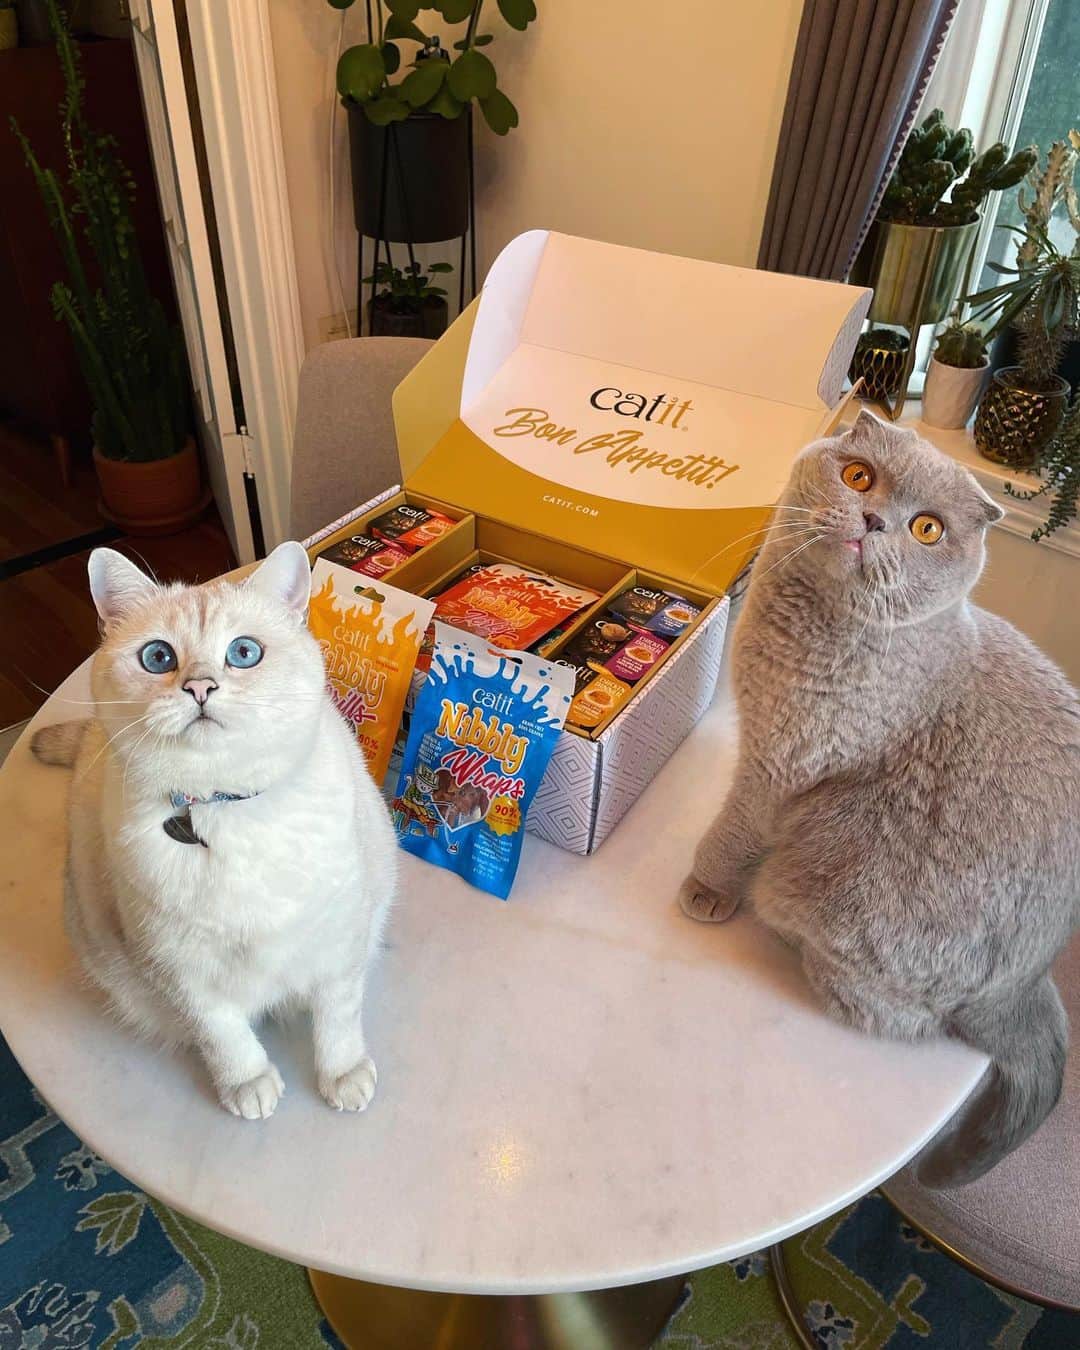 Millaのインスタグラム：「‼️CATIT GIVEAWAY ‼️ 😺 Milla is selecting FIVE WINNERS on MONDAY 1.25 and notified via DM. (Only valid for U.S. residents).  Prize 🎁 package includes: Two-month supply of Catit Dinner Bistro Boxes (60 servings) A variety of other @catitdesignproducts treats and toys❗️   To enter:⁠ 1. Like this photo 2. Make sure you’re following both Milla and @catitdesignproducts  3. Tag one friend (or more!) in the comments 4. To receive a bonus entry, share this post to your stories!    CATIT Fine dining delivered on your schedule and directly to your doorstep 3 Bistro Box varieties – Chicken, Fish or Variety (30 servings per box)😺  •Catit Dinner is premium-quality wet food with a unique dual-texture format •Made with fresh, all-natural ingredients and essential nutrients •High in protein with added vitamins and minerals •Hydrating complement to cats’ daily dry food intake  #MillaTheCat #catit #catitdesignproducts #catitbistrobox #giveaway #catfood」